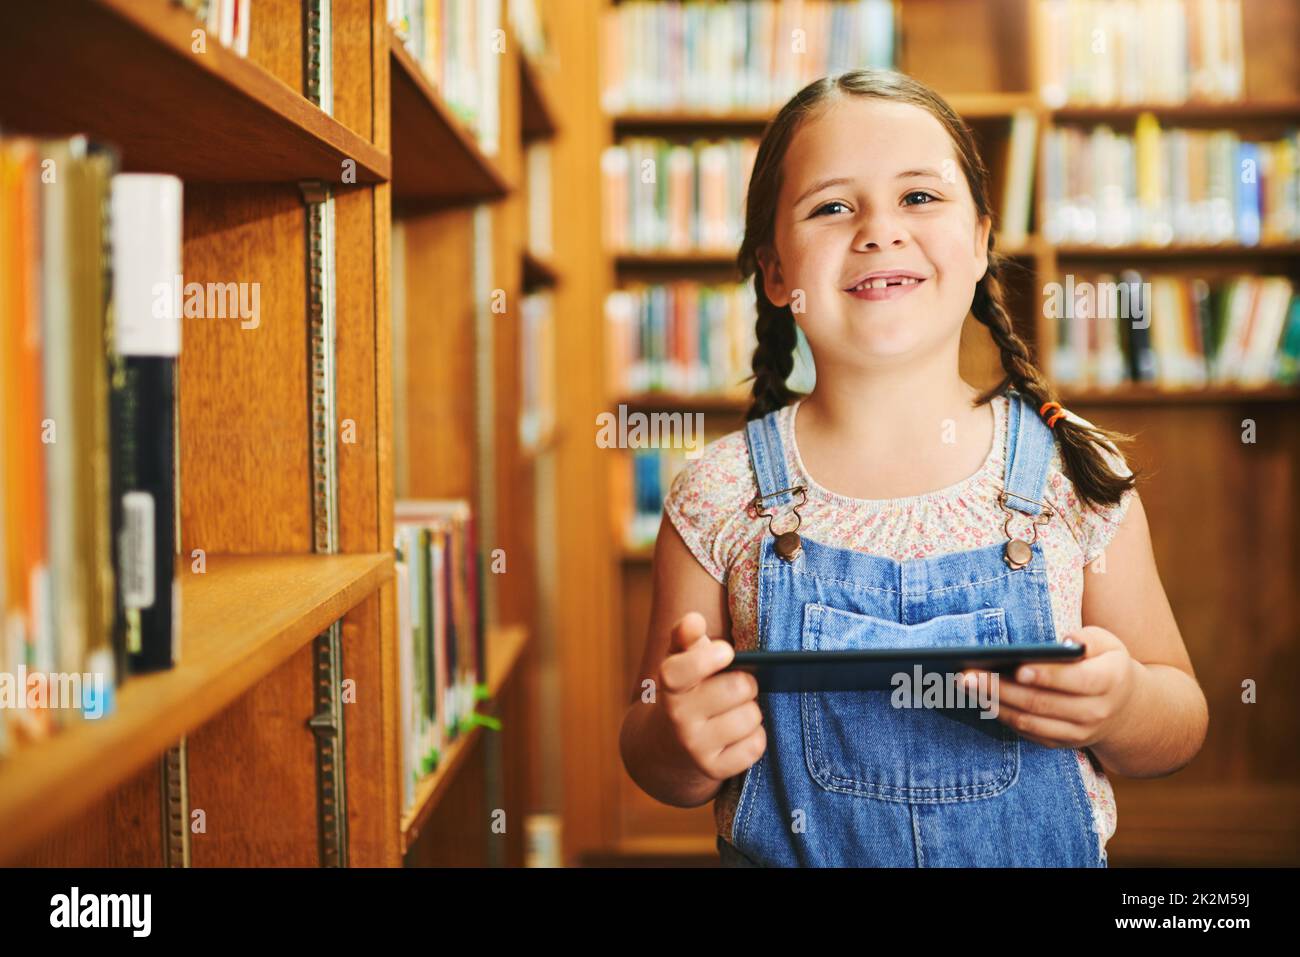 This is almost like a book. Portrait of a cheerful young girl browsing on a digital tablet while standing inside of a library during the day. Stock Photo